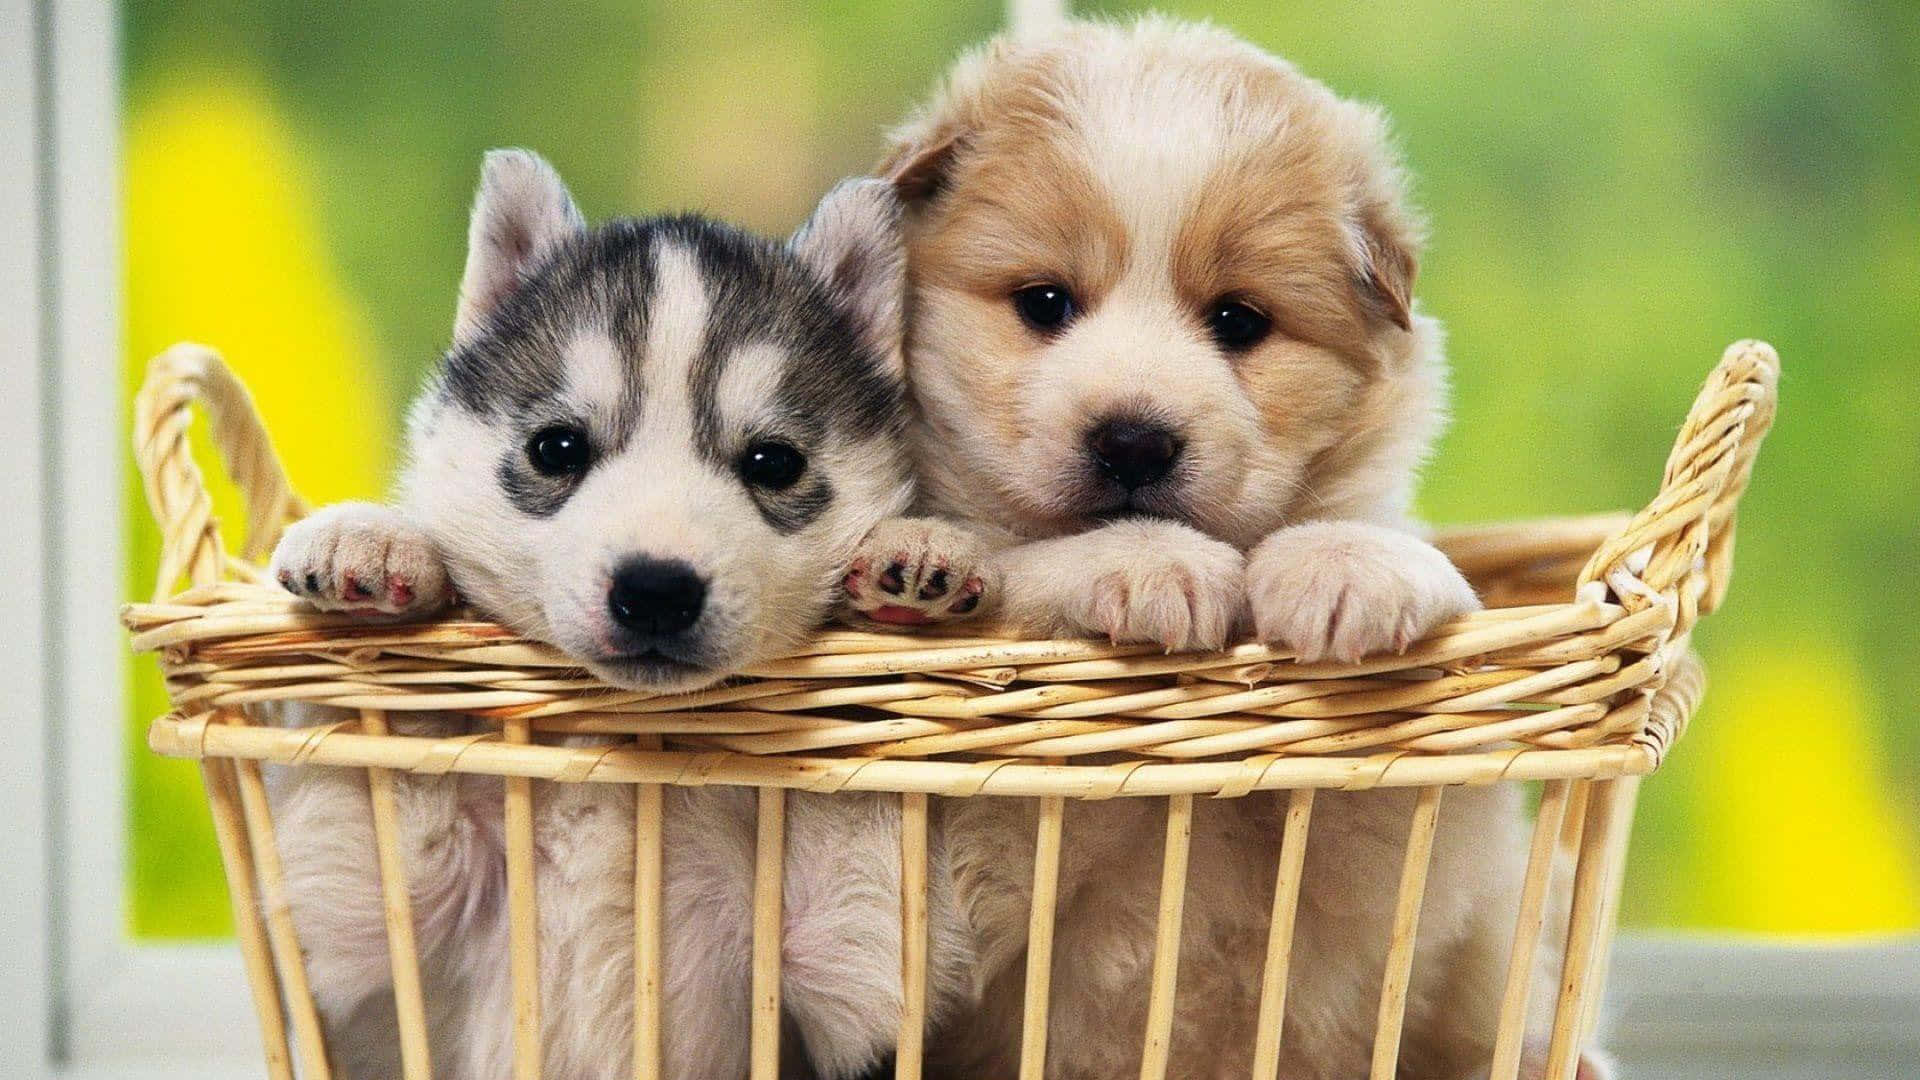 Take a look at this fluffy puppy! Wallpaper